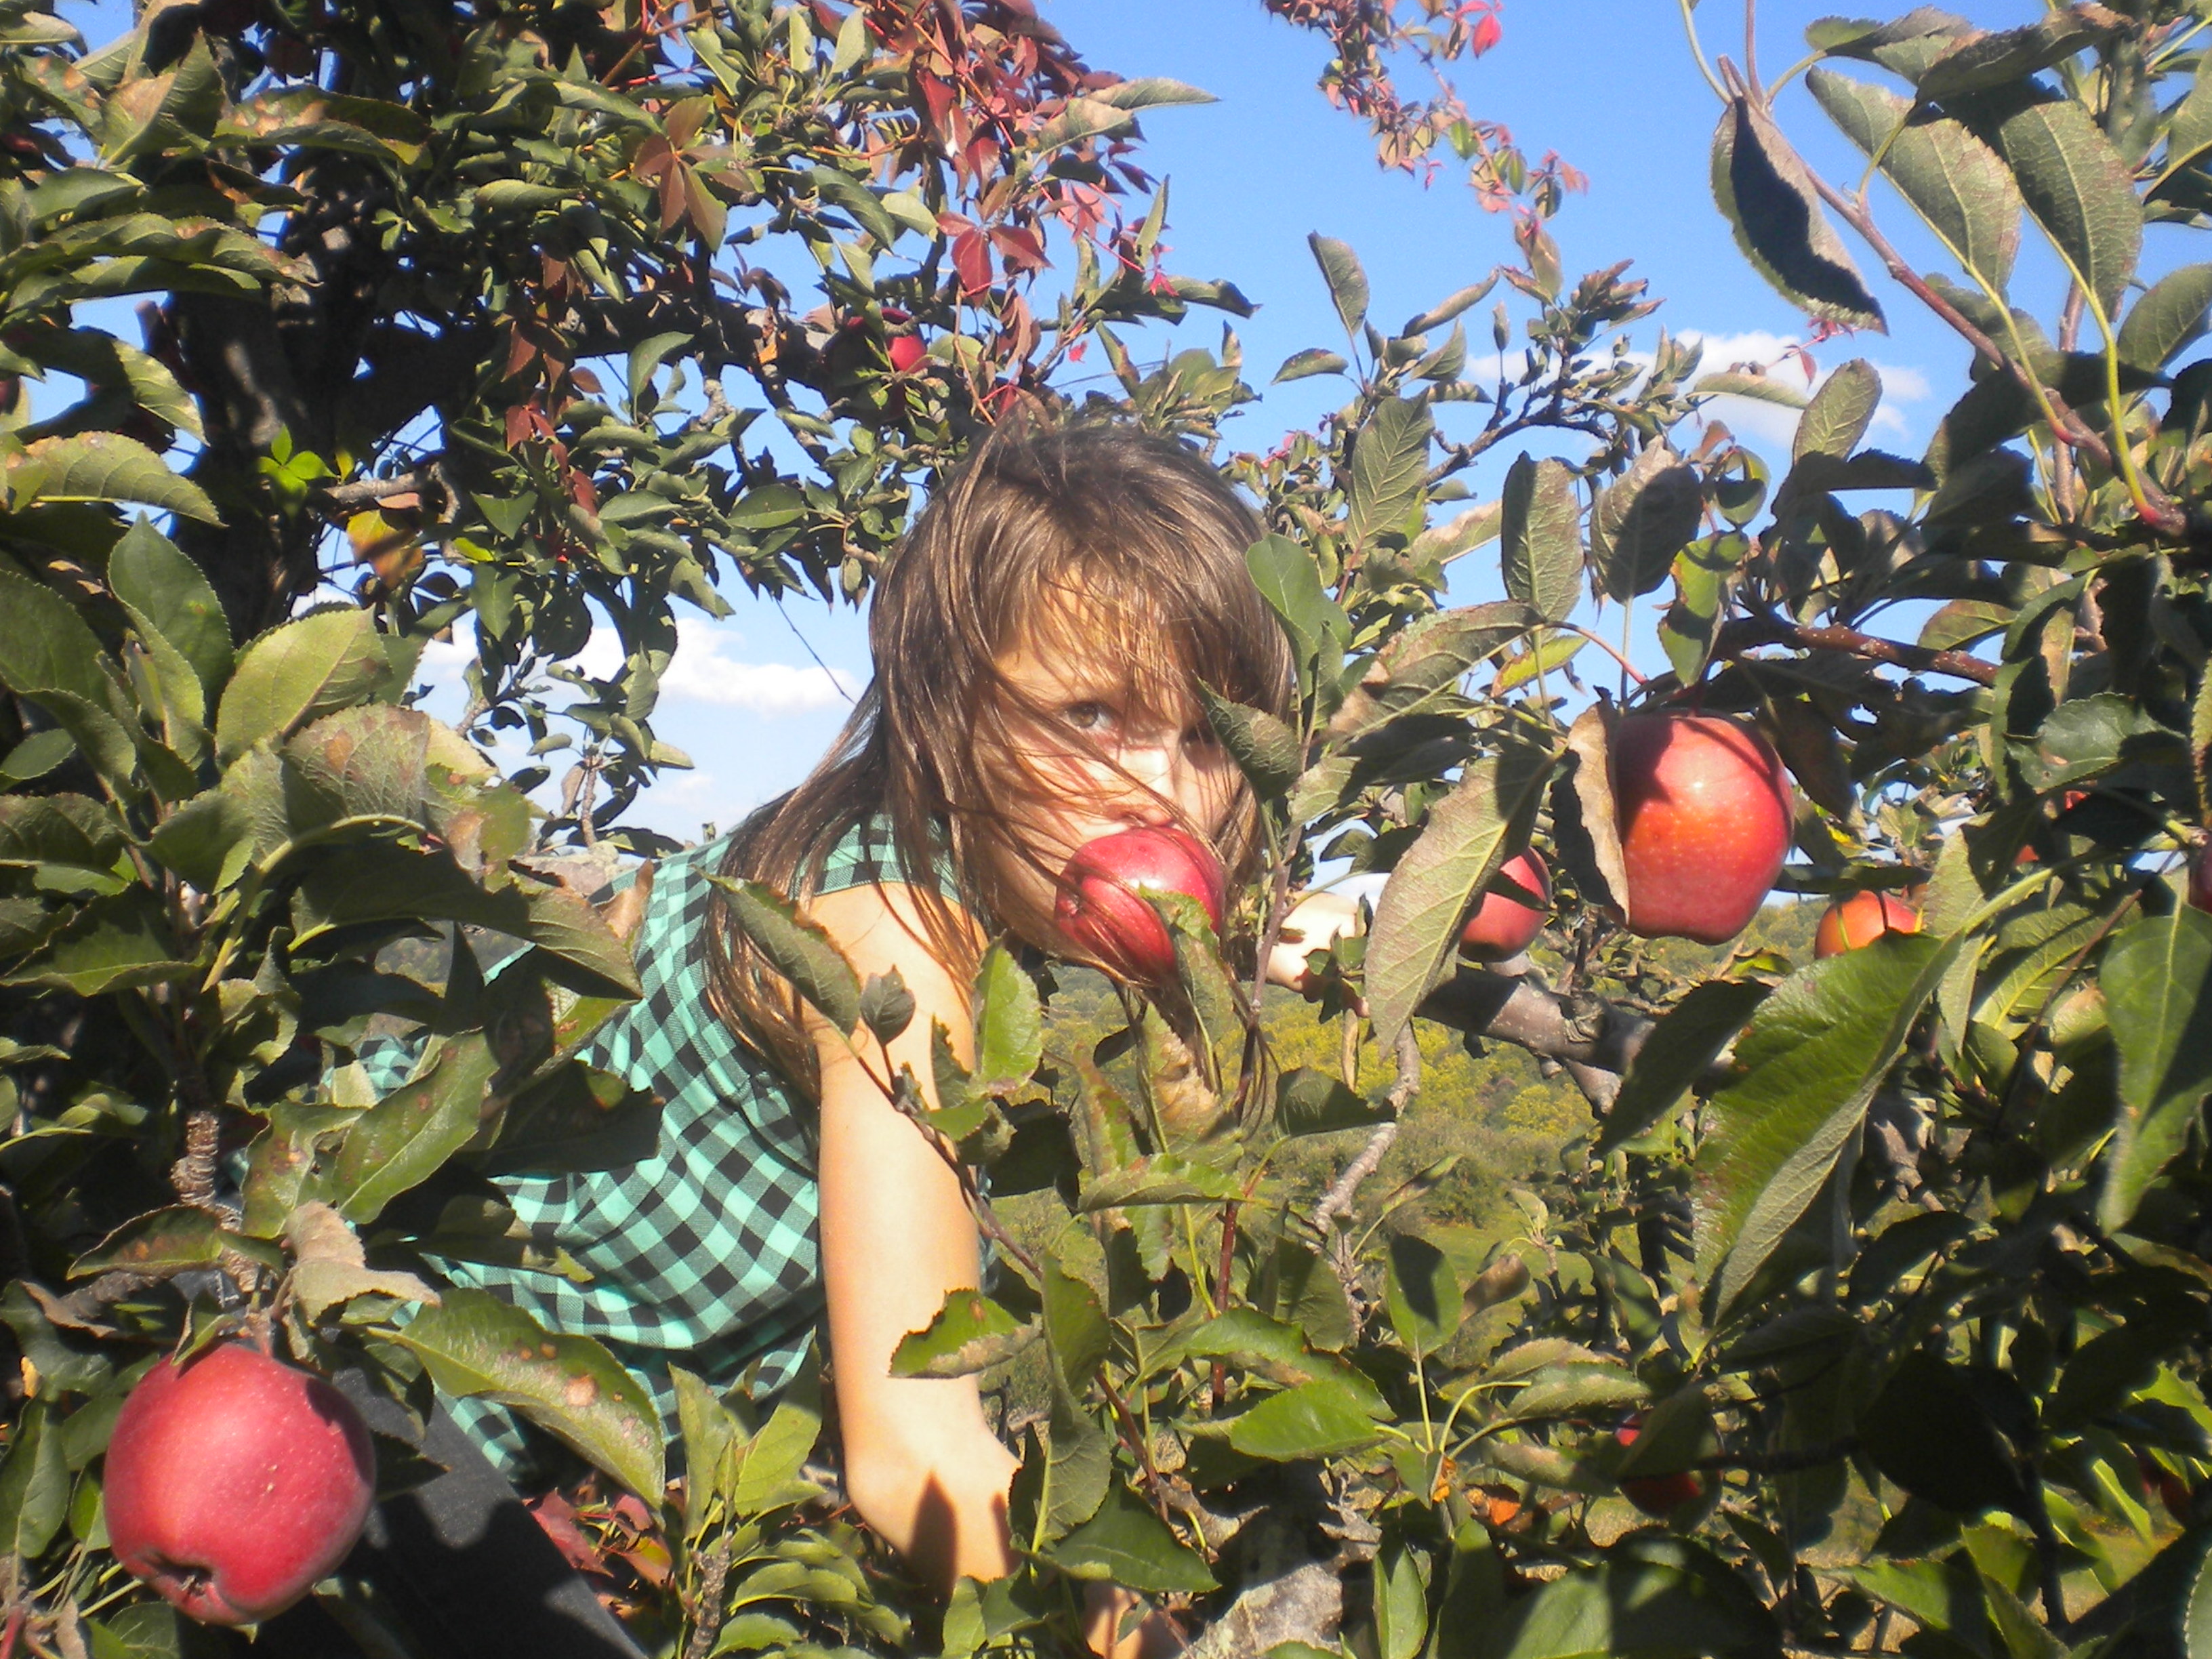 Taking a break from shooting SYRIA... Rachel found an apple tree